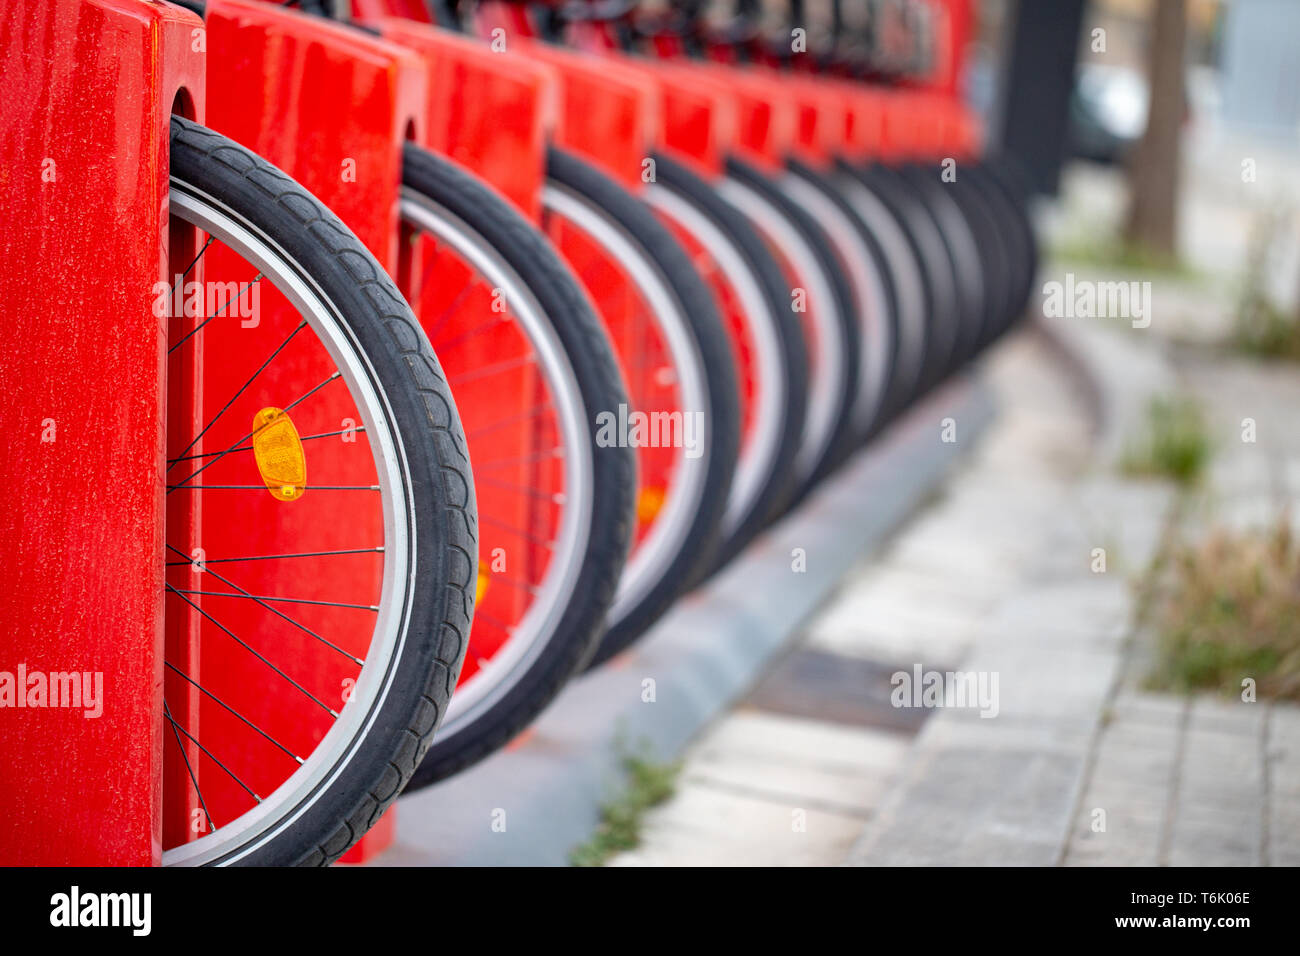 Many bicycle in a row. Red bicycles stand on a parking for rent. Eco friendly transportation concept. Stock Photo